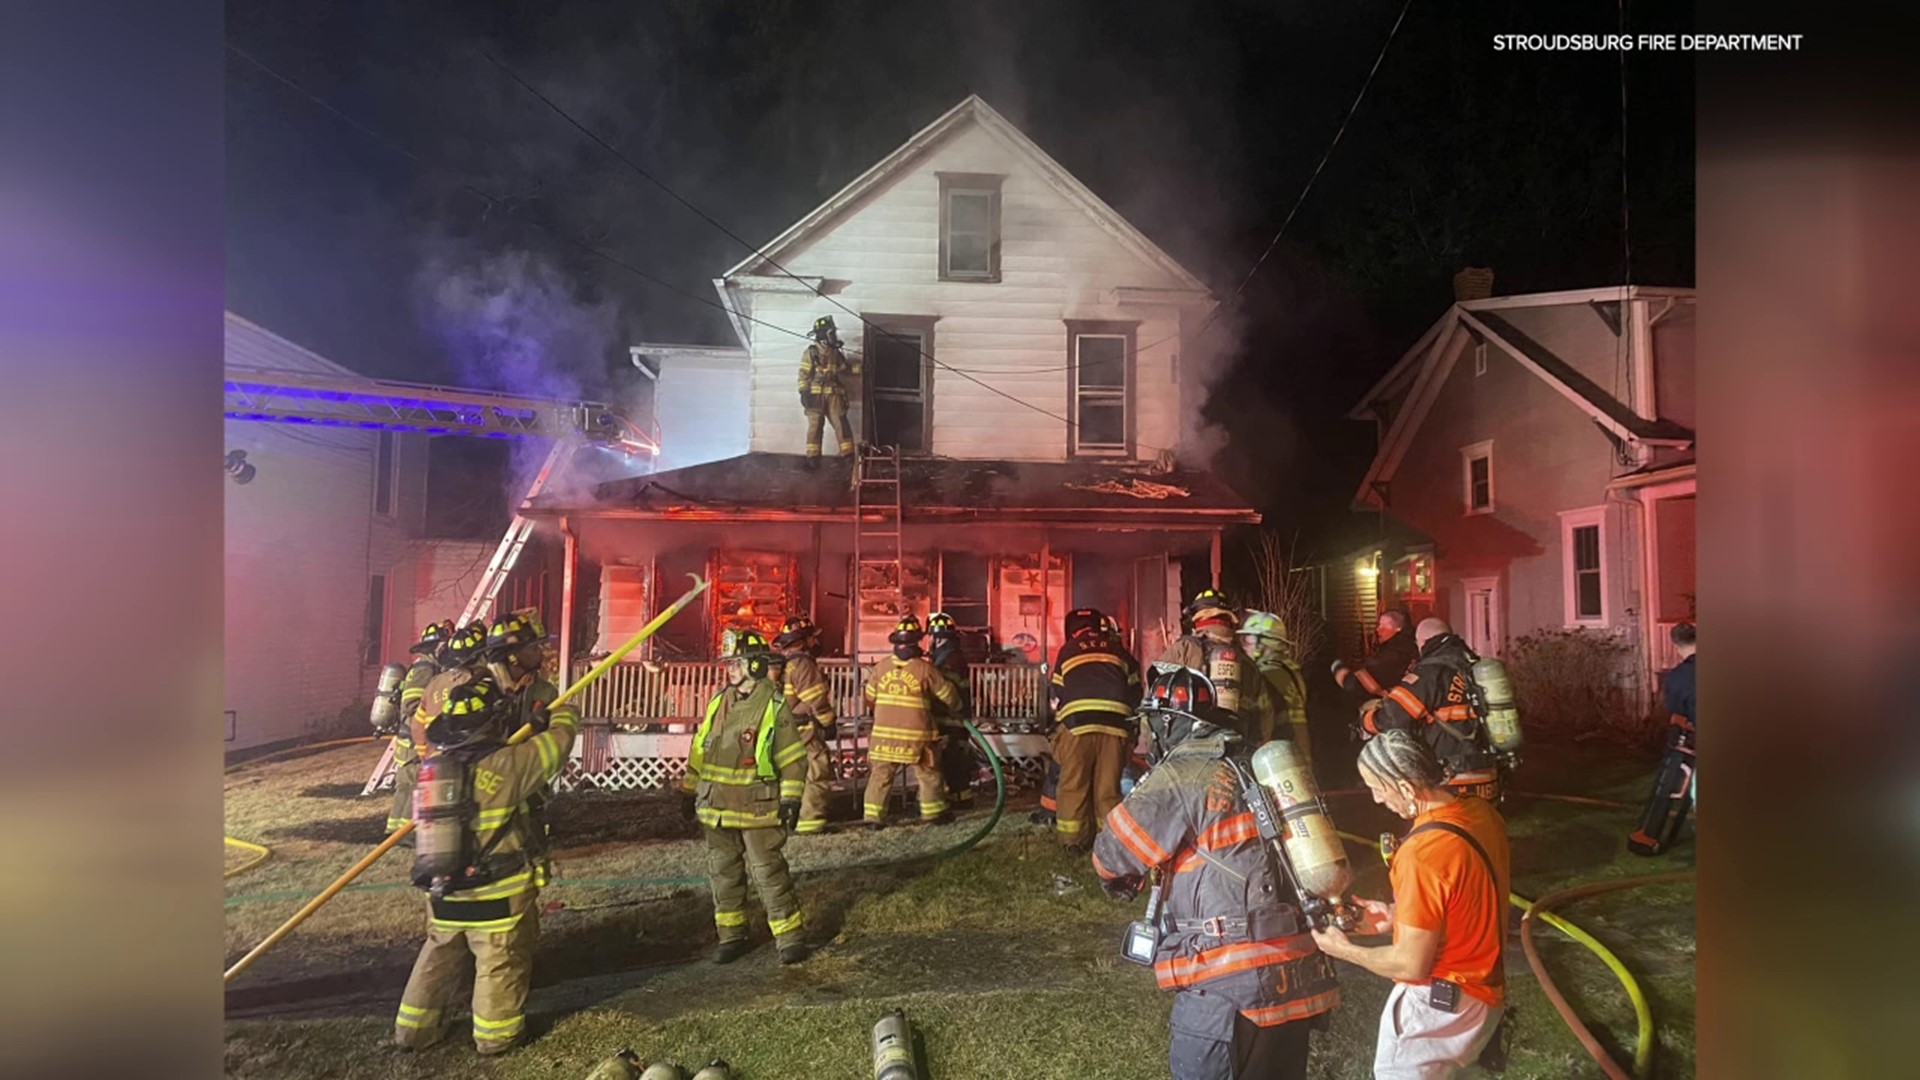 Flames broke out around 8 p.m. Monday night at a home along Lee Avenue in Stroudsburg.